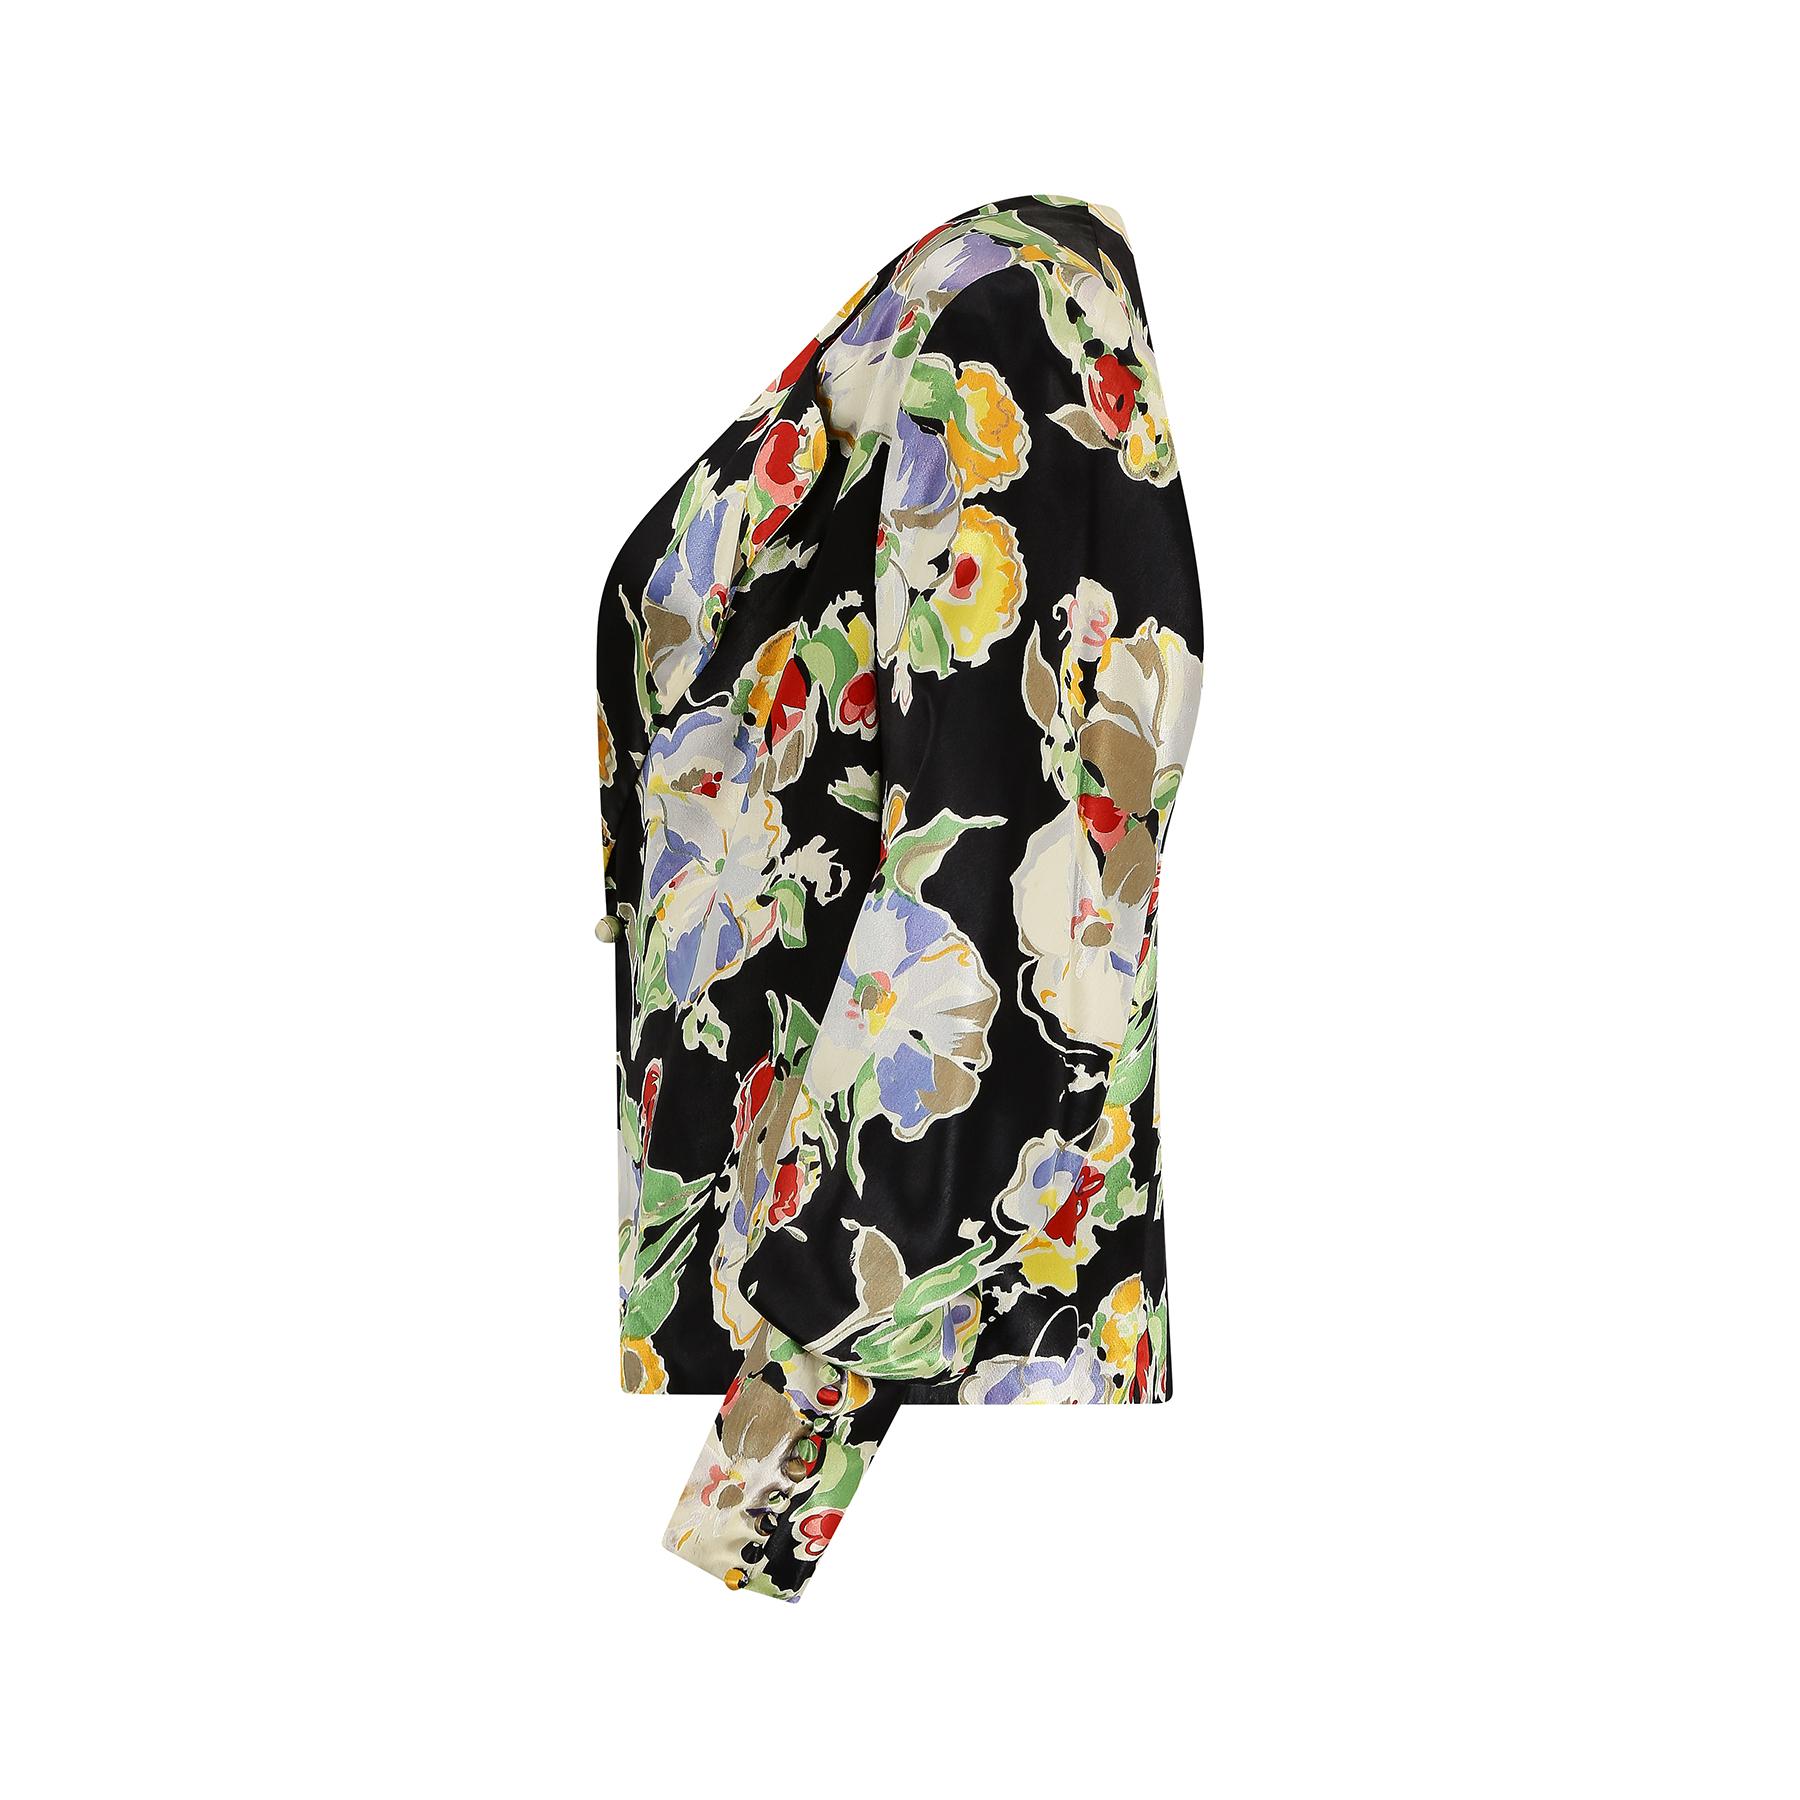 This is a really good 1930s jacket when floral satin fabrics were the height of fashion and sophistication for dinner and cocktail-wear. This has a really excellent print made up of a floral spray of what looks like irises and roses amongst others.